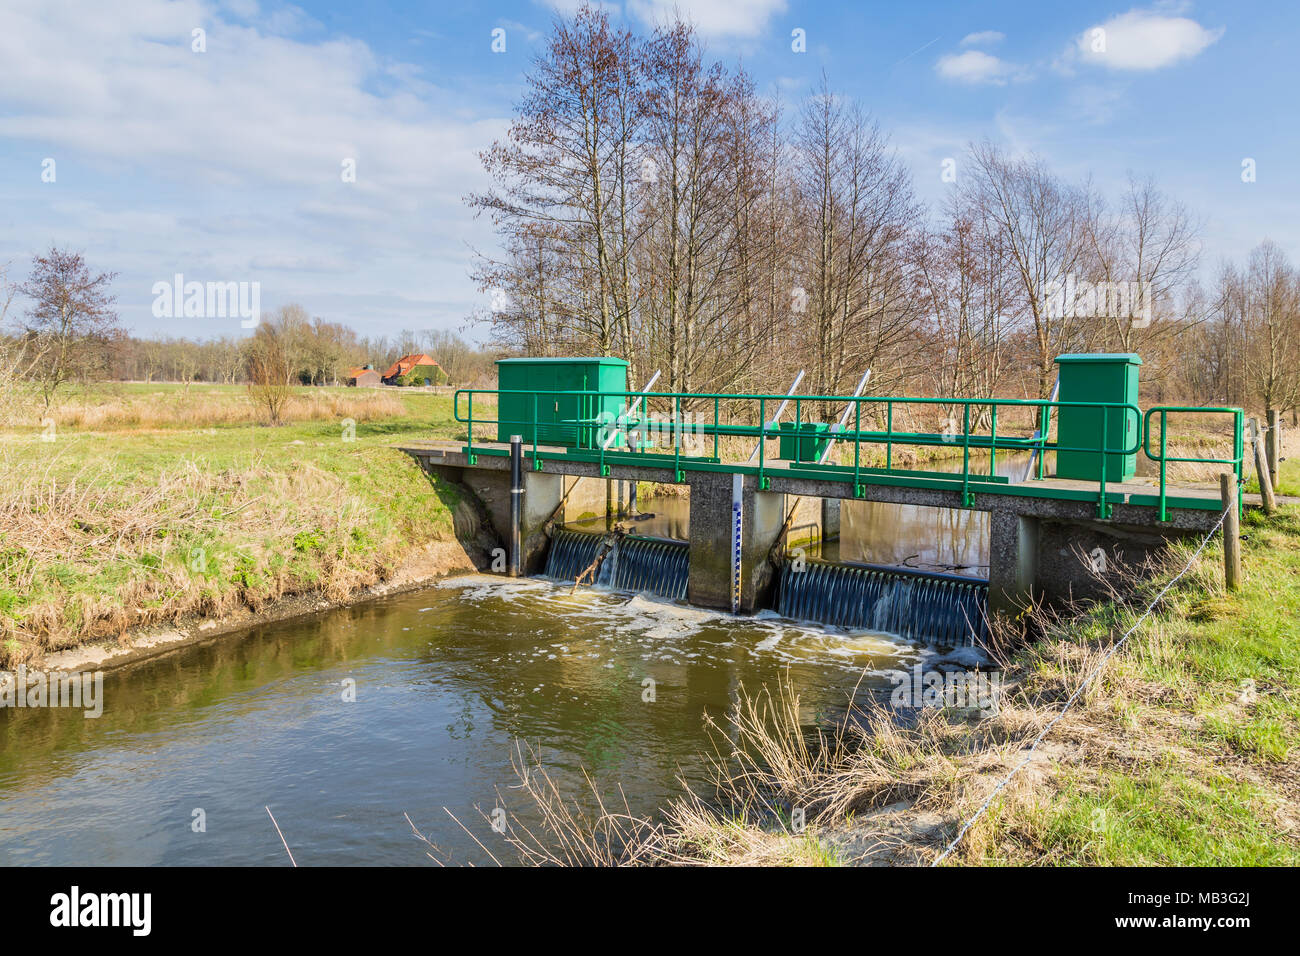 Narrow bridge over a small river in a nature reserve in the Netherlands. There is a weir under the bridge. It is at the end of the winter season. Stock Photo